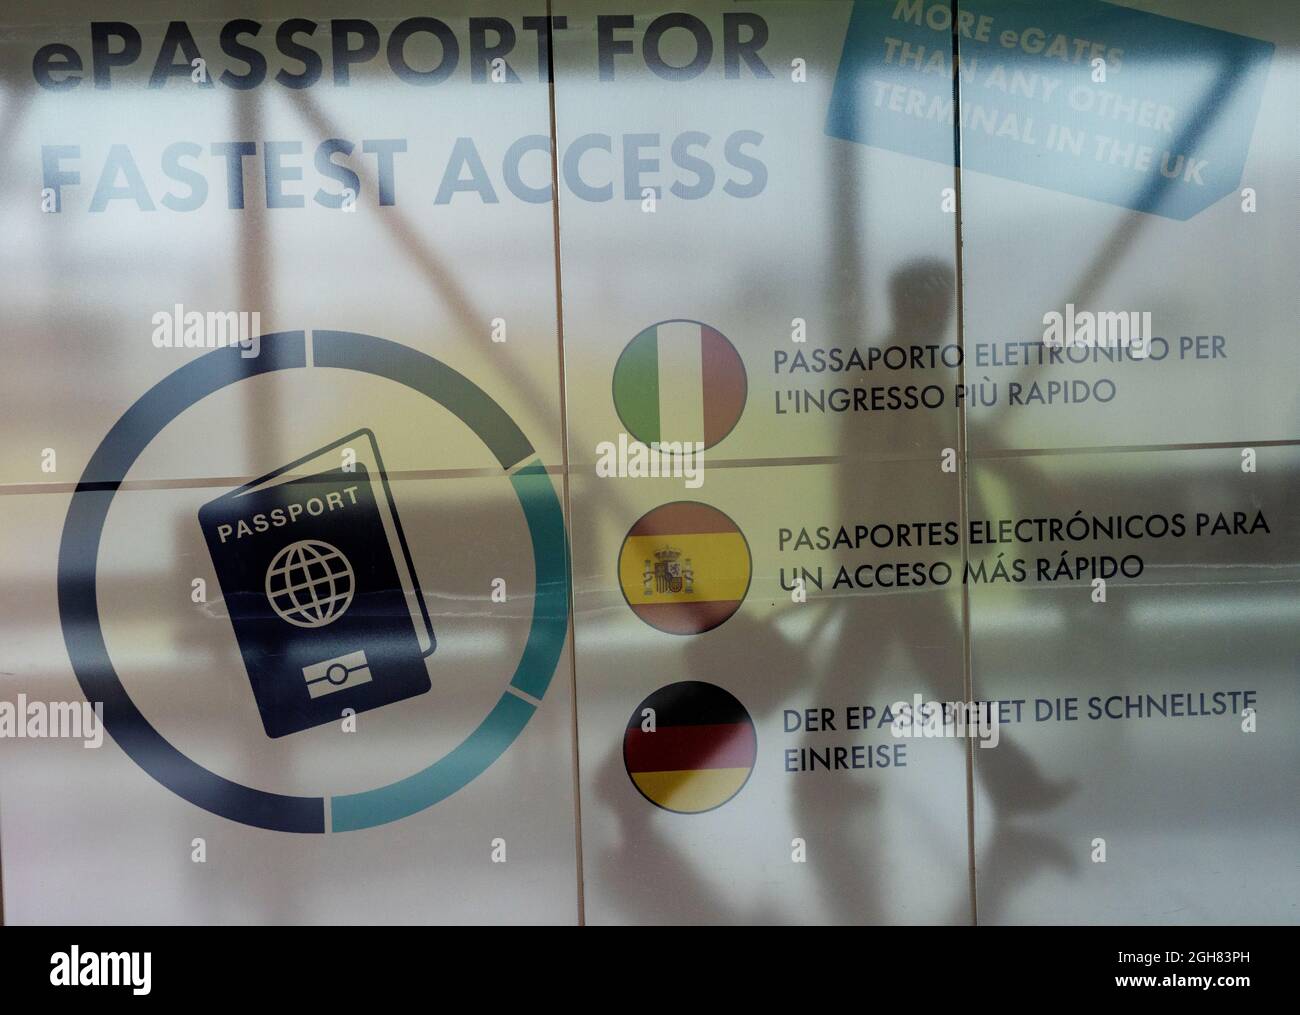 A passenger arrives at Stansted airport, walking past a sign promoting electronic passports. Stock Photo